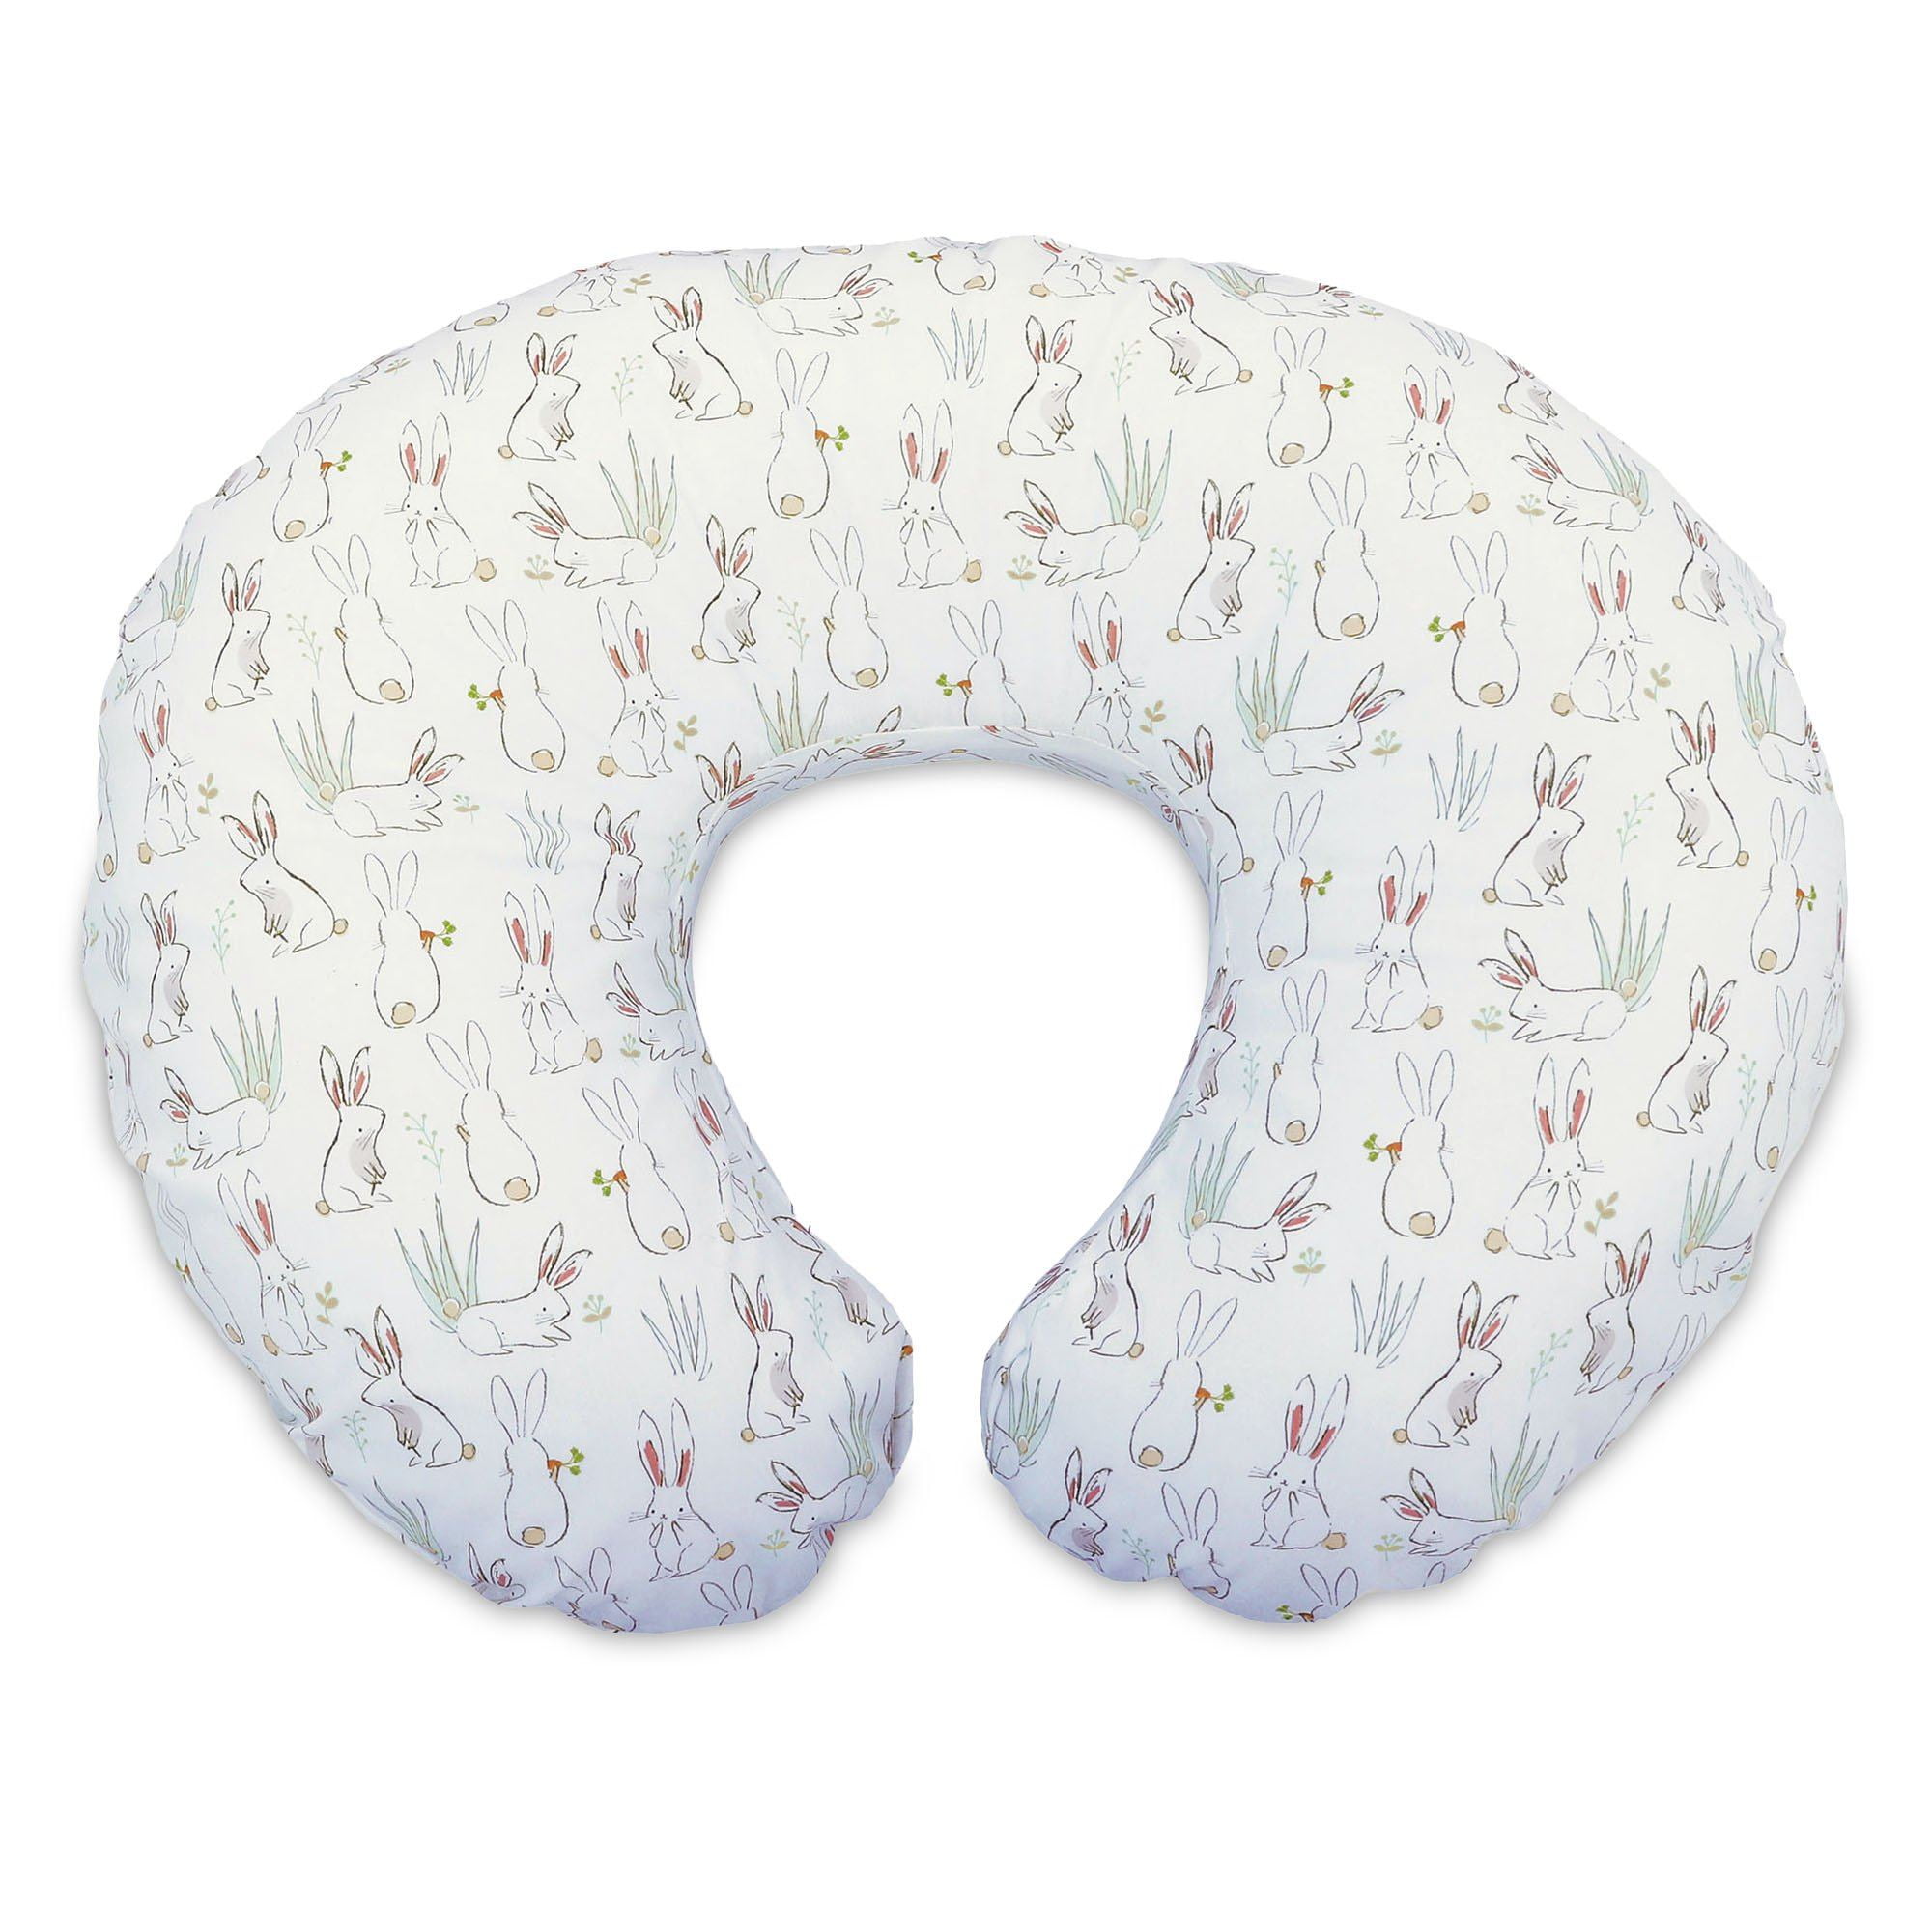 BABY BREAST FEEDING PILLOW NURSING MATERNITY PREGNANCY REMOVABLE COTTON COVER Bear & bunny blue